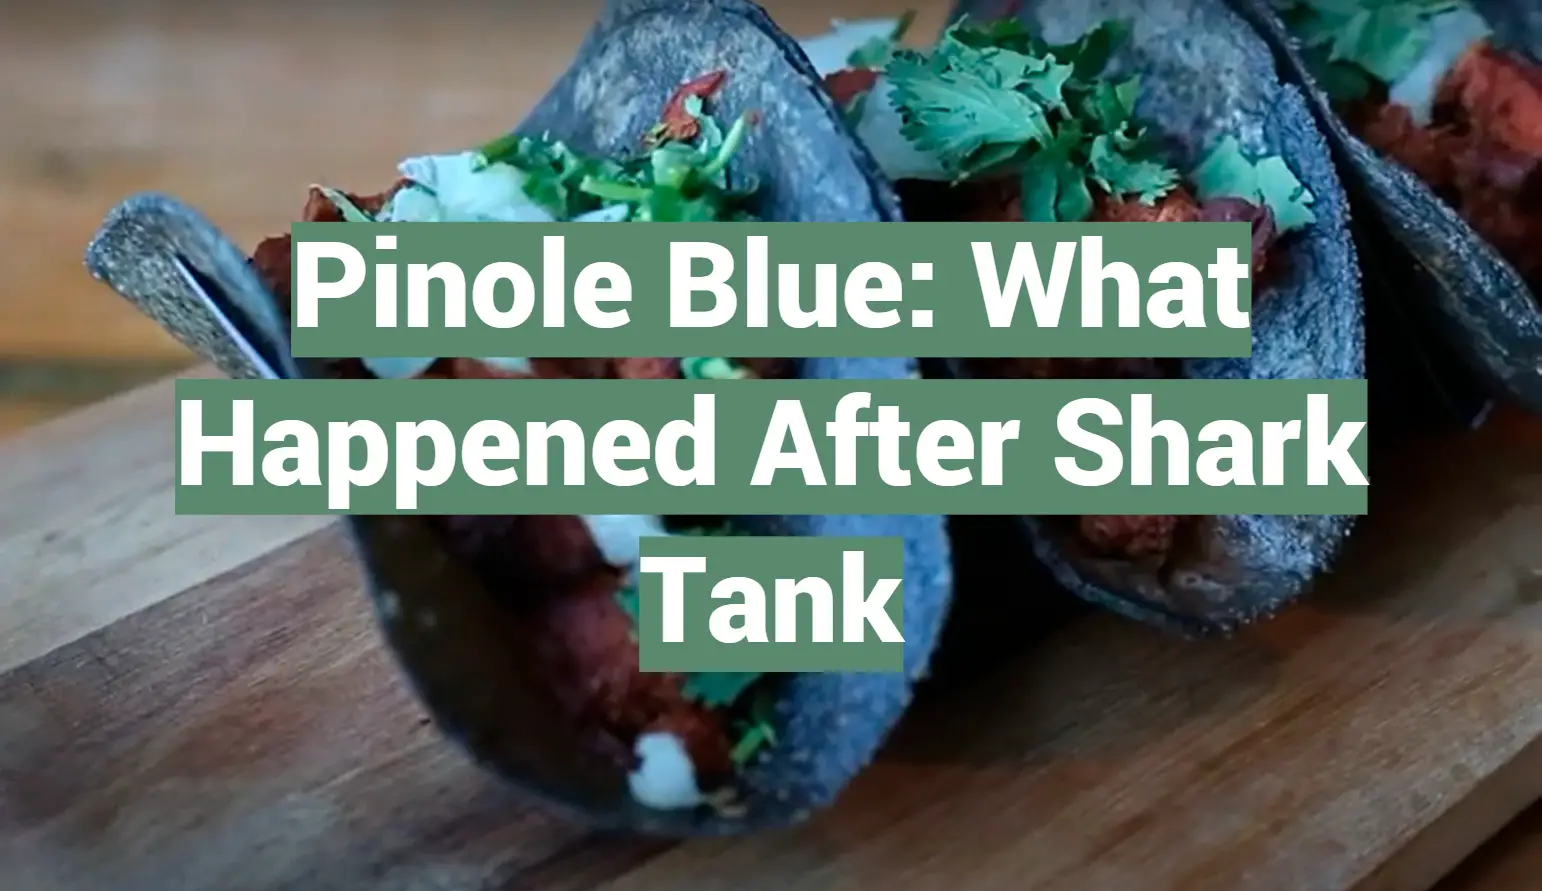 Pinole Blue: What Happened After Shark Tank